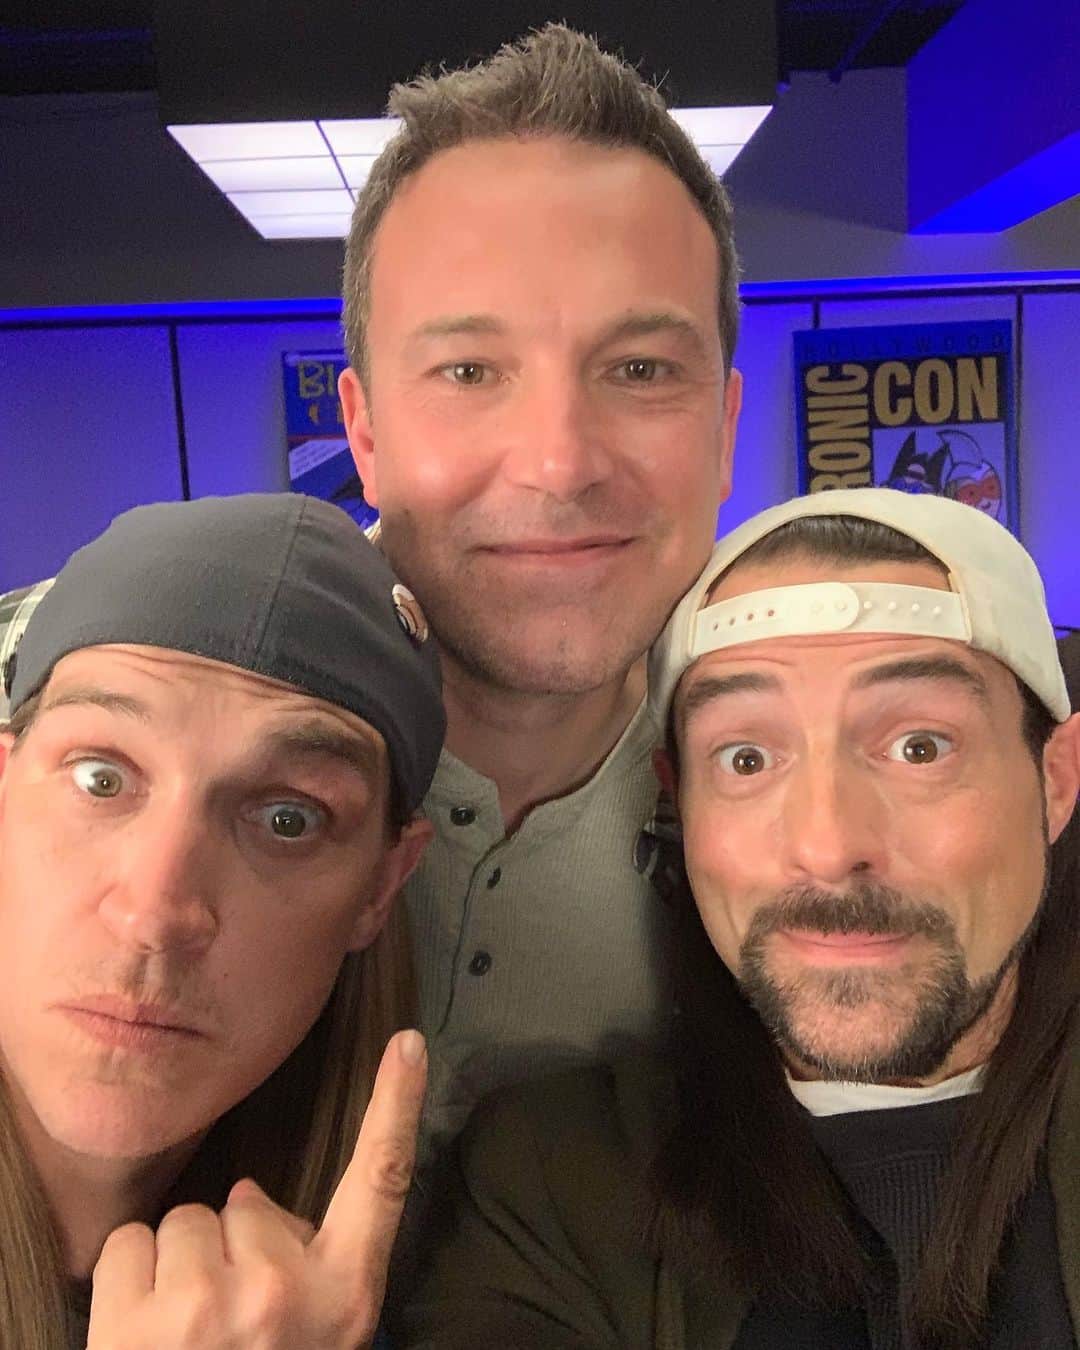 ケヴィン・スミスさんのインスタグラム写真 - (ケヴィン・スミスInstagram)「MY BOYFRIEND’S BACK! When the trailer for @jayandsilentbob Reboot dropped (link in my bio), folks found out a few of our secrets - one of the biggest being that @benaffleck is back as Holden McNeil! The co-creator of #bluntmanandchronic and friend of #jayandsilentbob plays a crucial role in the Reboot and his scene is one of the best bits of cinema I’ve ever been involved with: it’s absolutely magical and life-affirming and all the things I really care about now, post-heart attack. But when we started shooting the movie, the scene didn’t exist. This scene - and more importantly, my reunion with a guy who I’ve missed terribly for nearly a decade - only happened because of @kevinmccarthytv. Kev interviewed Ben for his @netflix movie #triplefrontier and kicked off by asking Ben “Did they call you for Reboot yet?” And Ben said no, but he was available. So producer @jordanmonsanto said “Call Ben.” I told her “That’s just some nice shit to say at a junket. He wasn’t serious.” A week later, Jordan, @jaymewes and @jenschwalbach we’re all pressing me to reach out to Ben, so I finally did. I was scared to be rejected, but I texted him “To paraphrase the sad old King Osric in CONAN THE BARBARIAN? ‘There comes a time when the jewels cease to sparkle, when the gold loses its luster, when the throne room becomes a prison, and all that is left is a director’s love for the people he used to make pretend with.’” And after a long beat of wondering how he’d receive this, my estranged friend wrote back as only he could: “Of course you still liken yourself to a king,” he joked. And then “Would be a pleasure to see you again, Old Man.” So naturally, weepy me - who breaks down emotionally during comic book flicks - was a blubbery mess. Not only did we score an amazing scene for the flick, but I also got my friend back - all because of entertainment journalism. Thank you, #kevinmccarthytv - your #viewaskew themed opening question not only allowed me to make an 8 page sequel to #chasingamy in the middle of #JayAndSilentBobReboot, it also brought back a massive missing piece of my heart. #KevinSmith #benaffleck #JasonMewes #reunited #comiccon #holdenmcneil」7月19日 23時54分 - thatkevinsmith